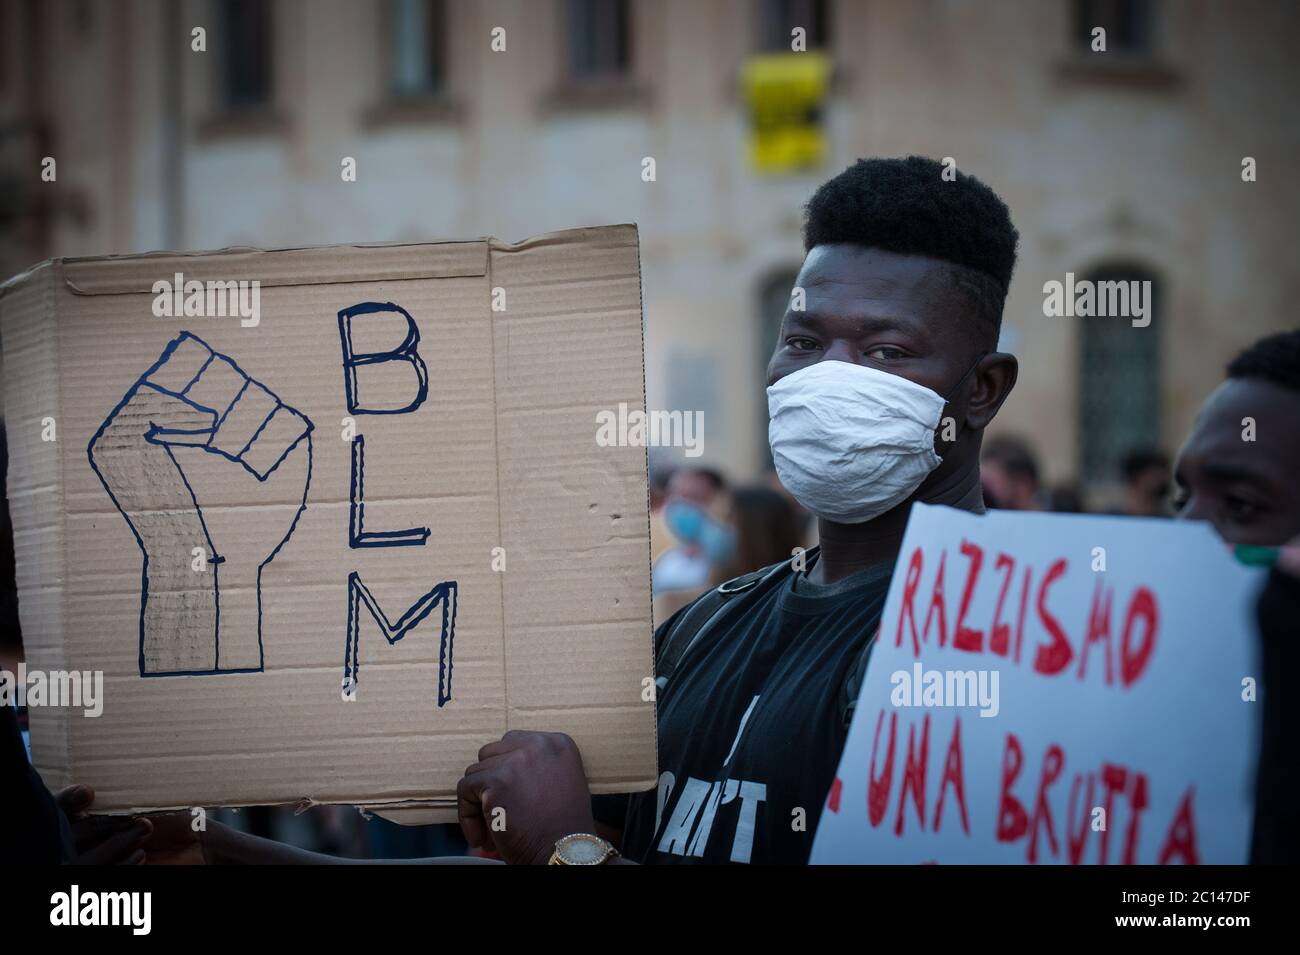 Flash mob against racism in Lecce, Italy:Black lifes matter Stock Photo